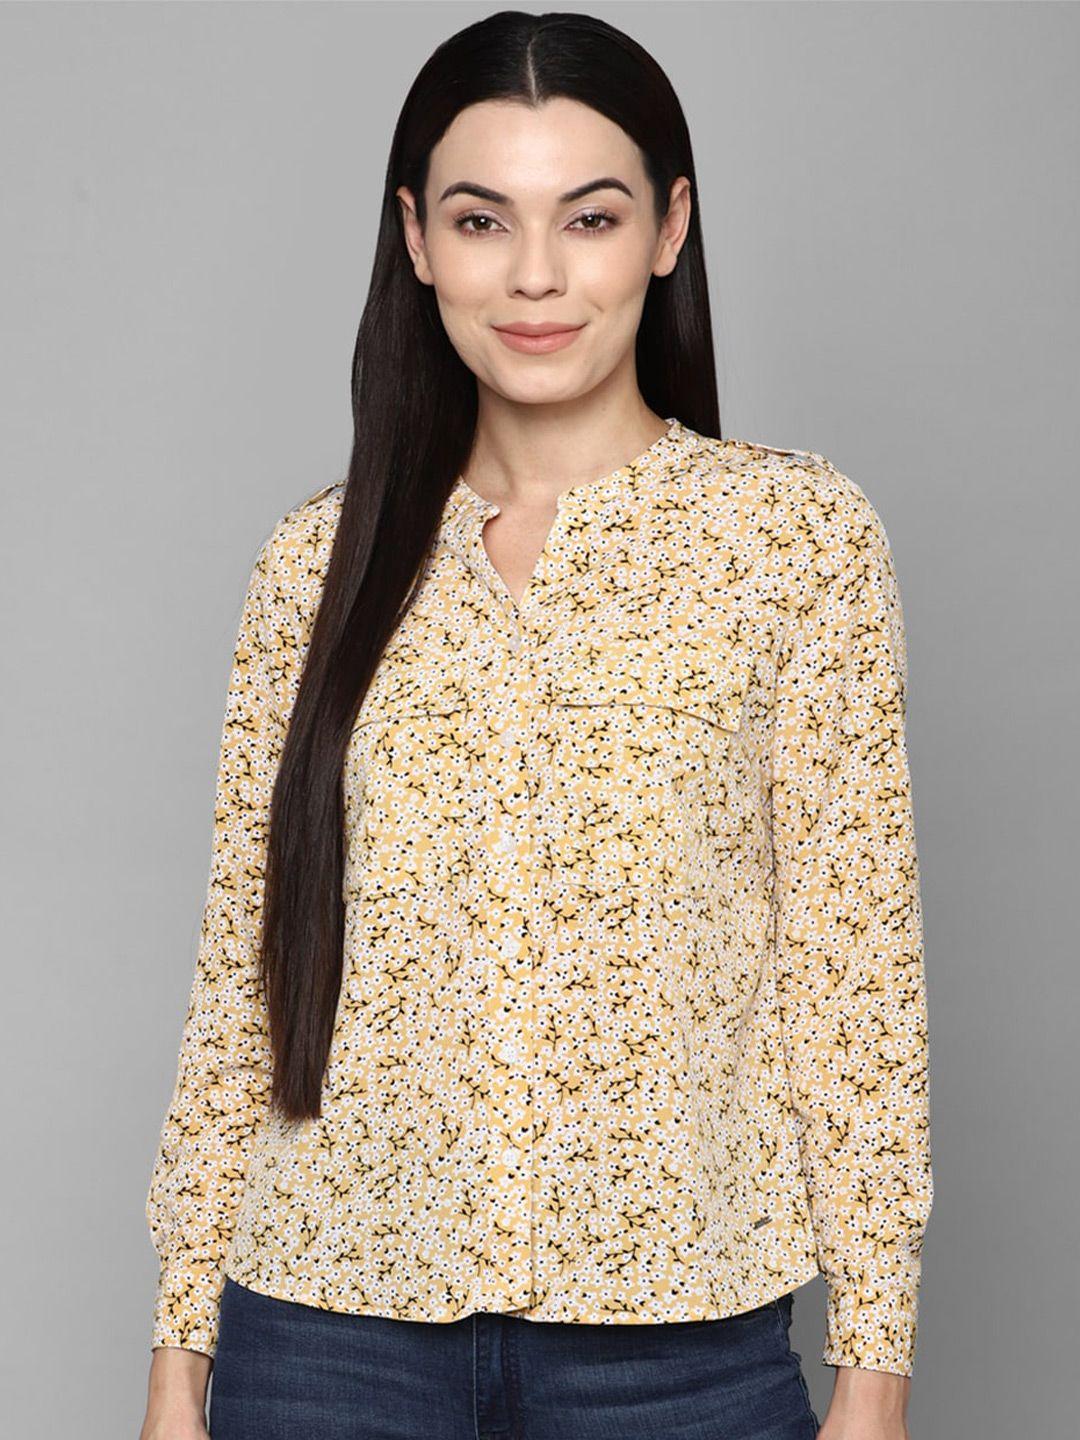 allen solly woman women yellow floral printed casual shirt